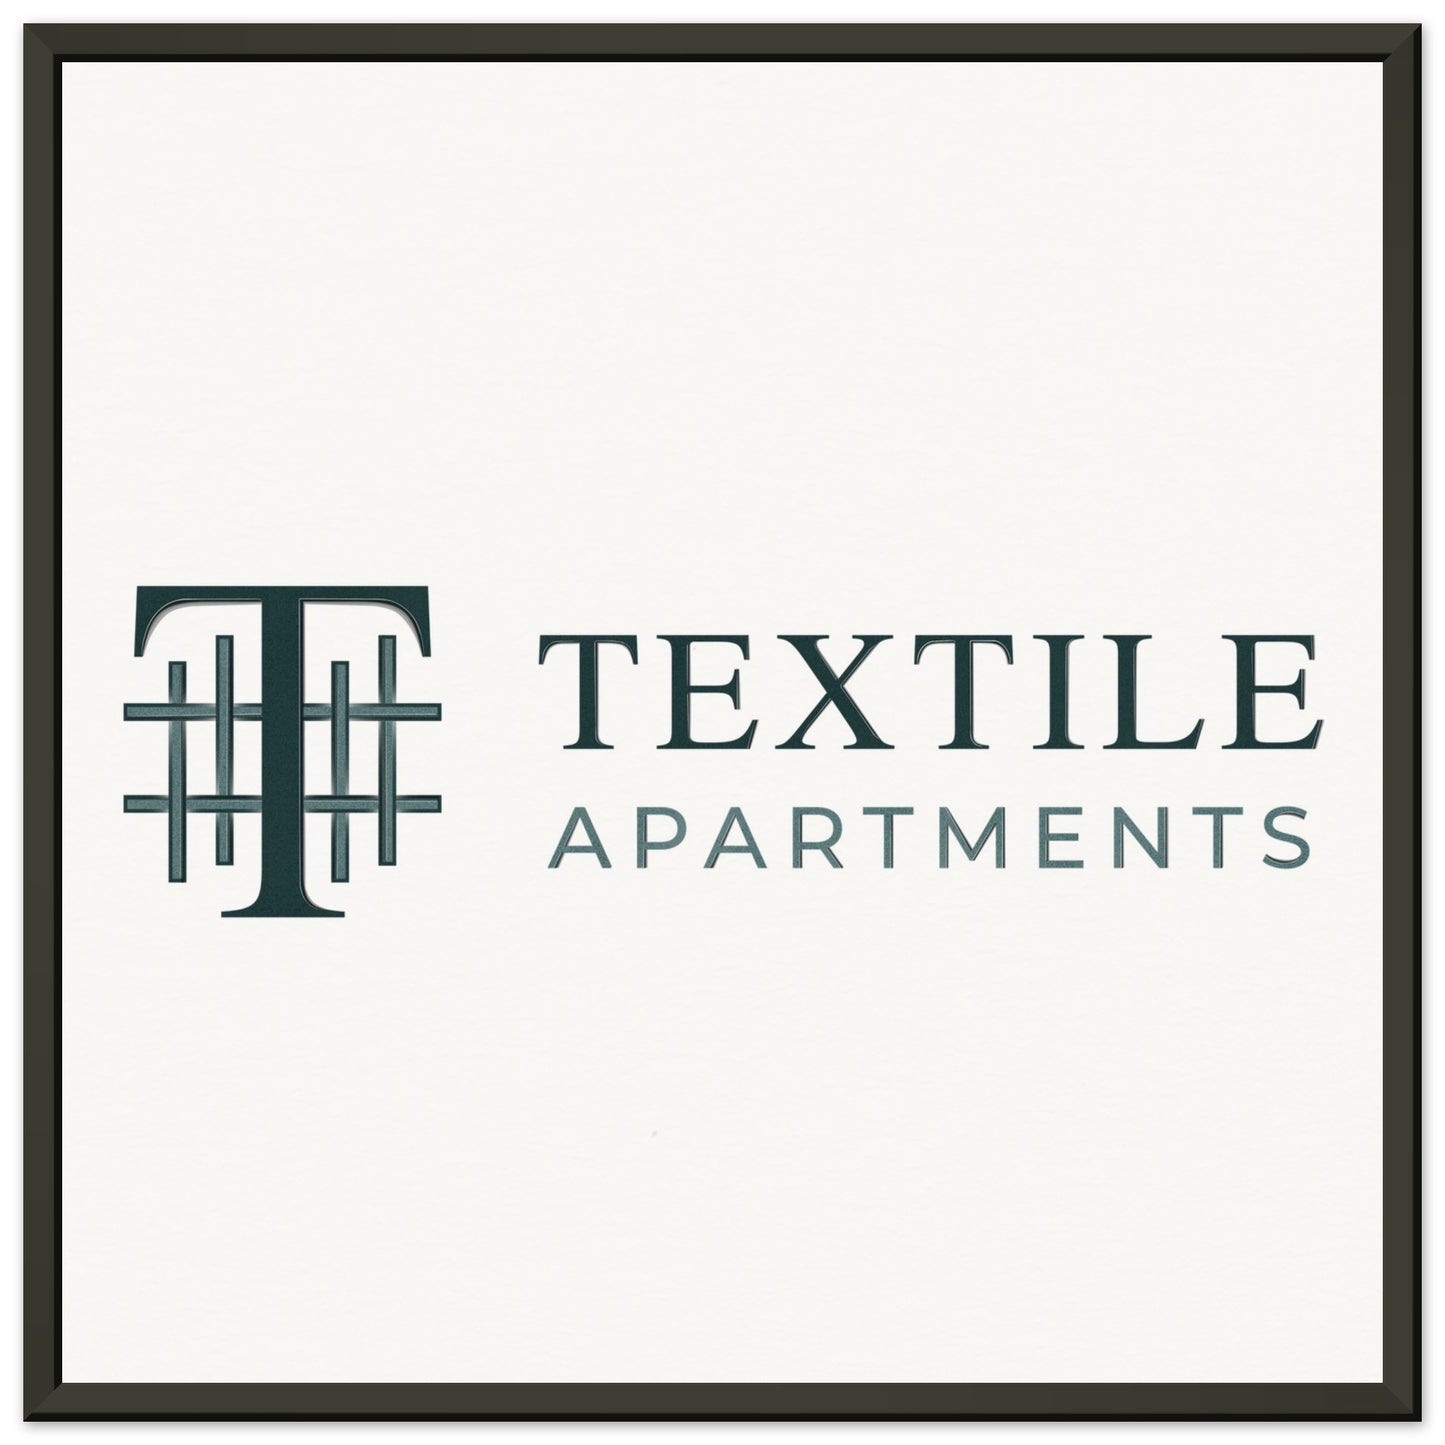 Textile Apartments - Museum-Quality Matte Paper Metal Framed Poster